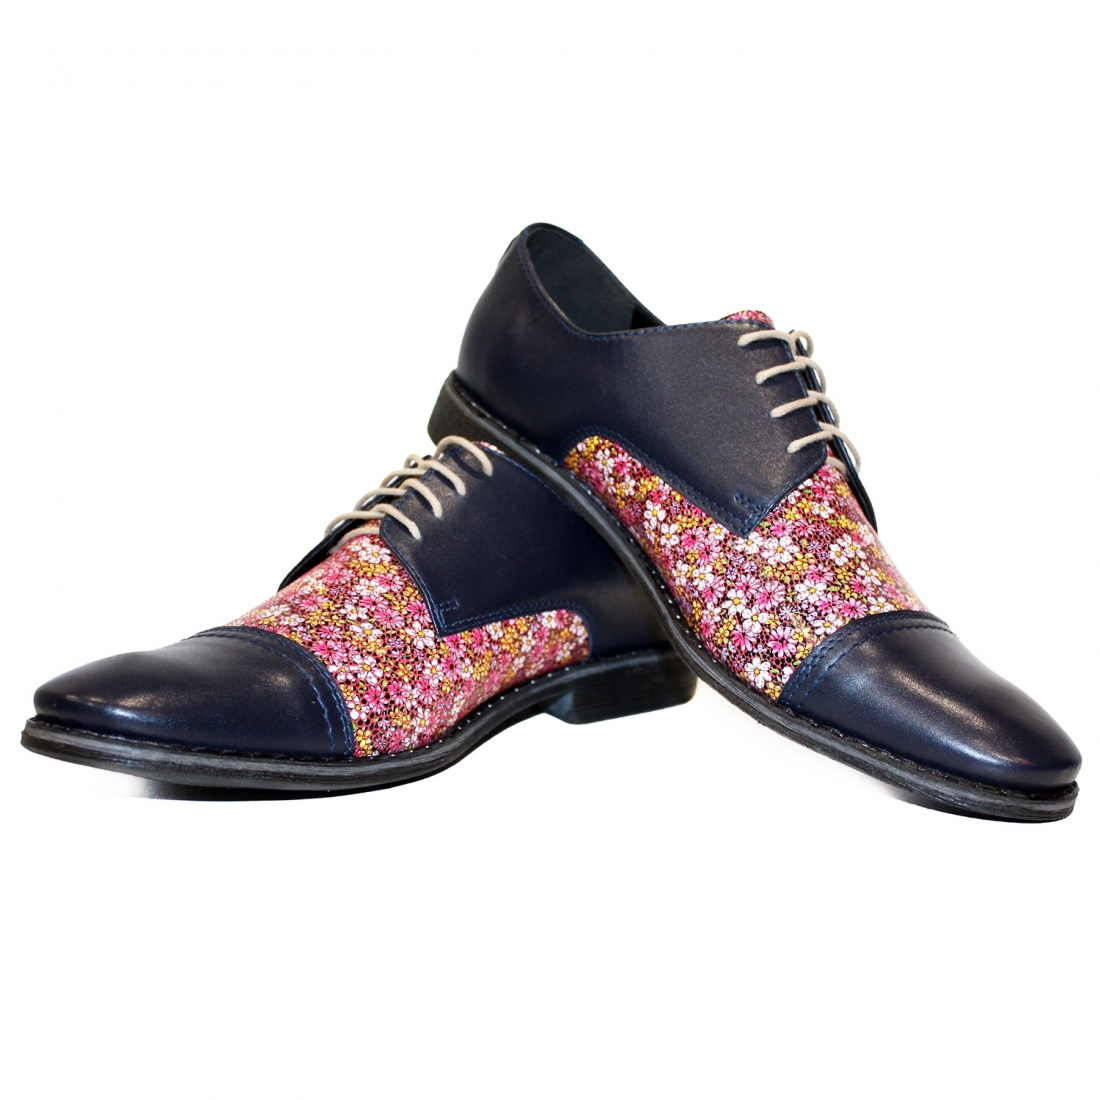 Modello Vacanzzo - Classic Shoes - Handmade Colorful Italian Leather Shoes